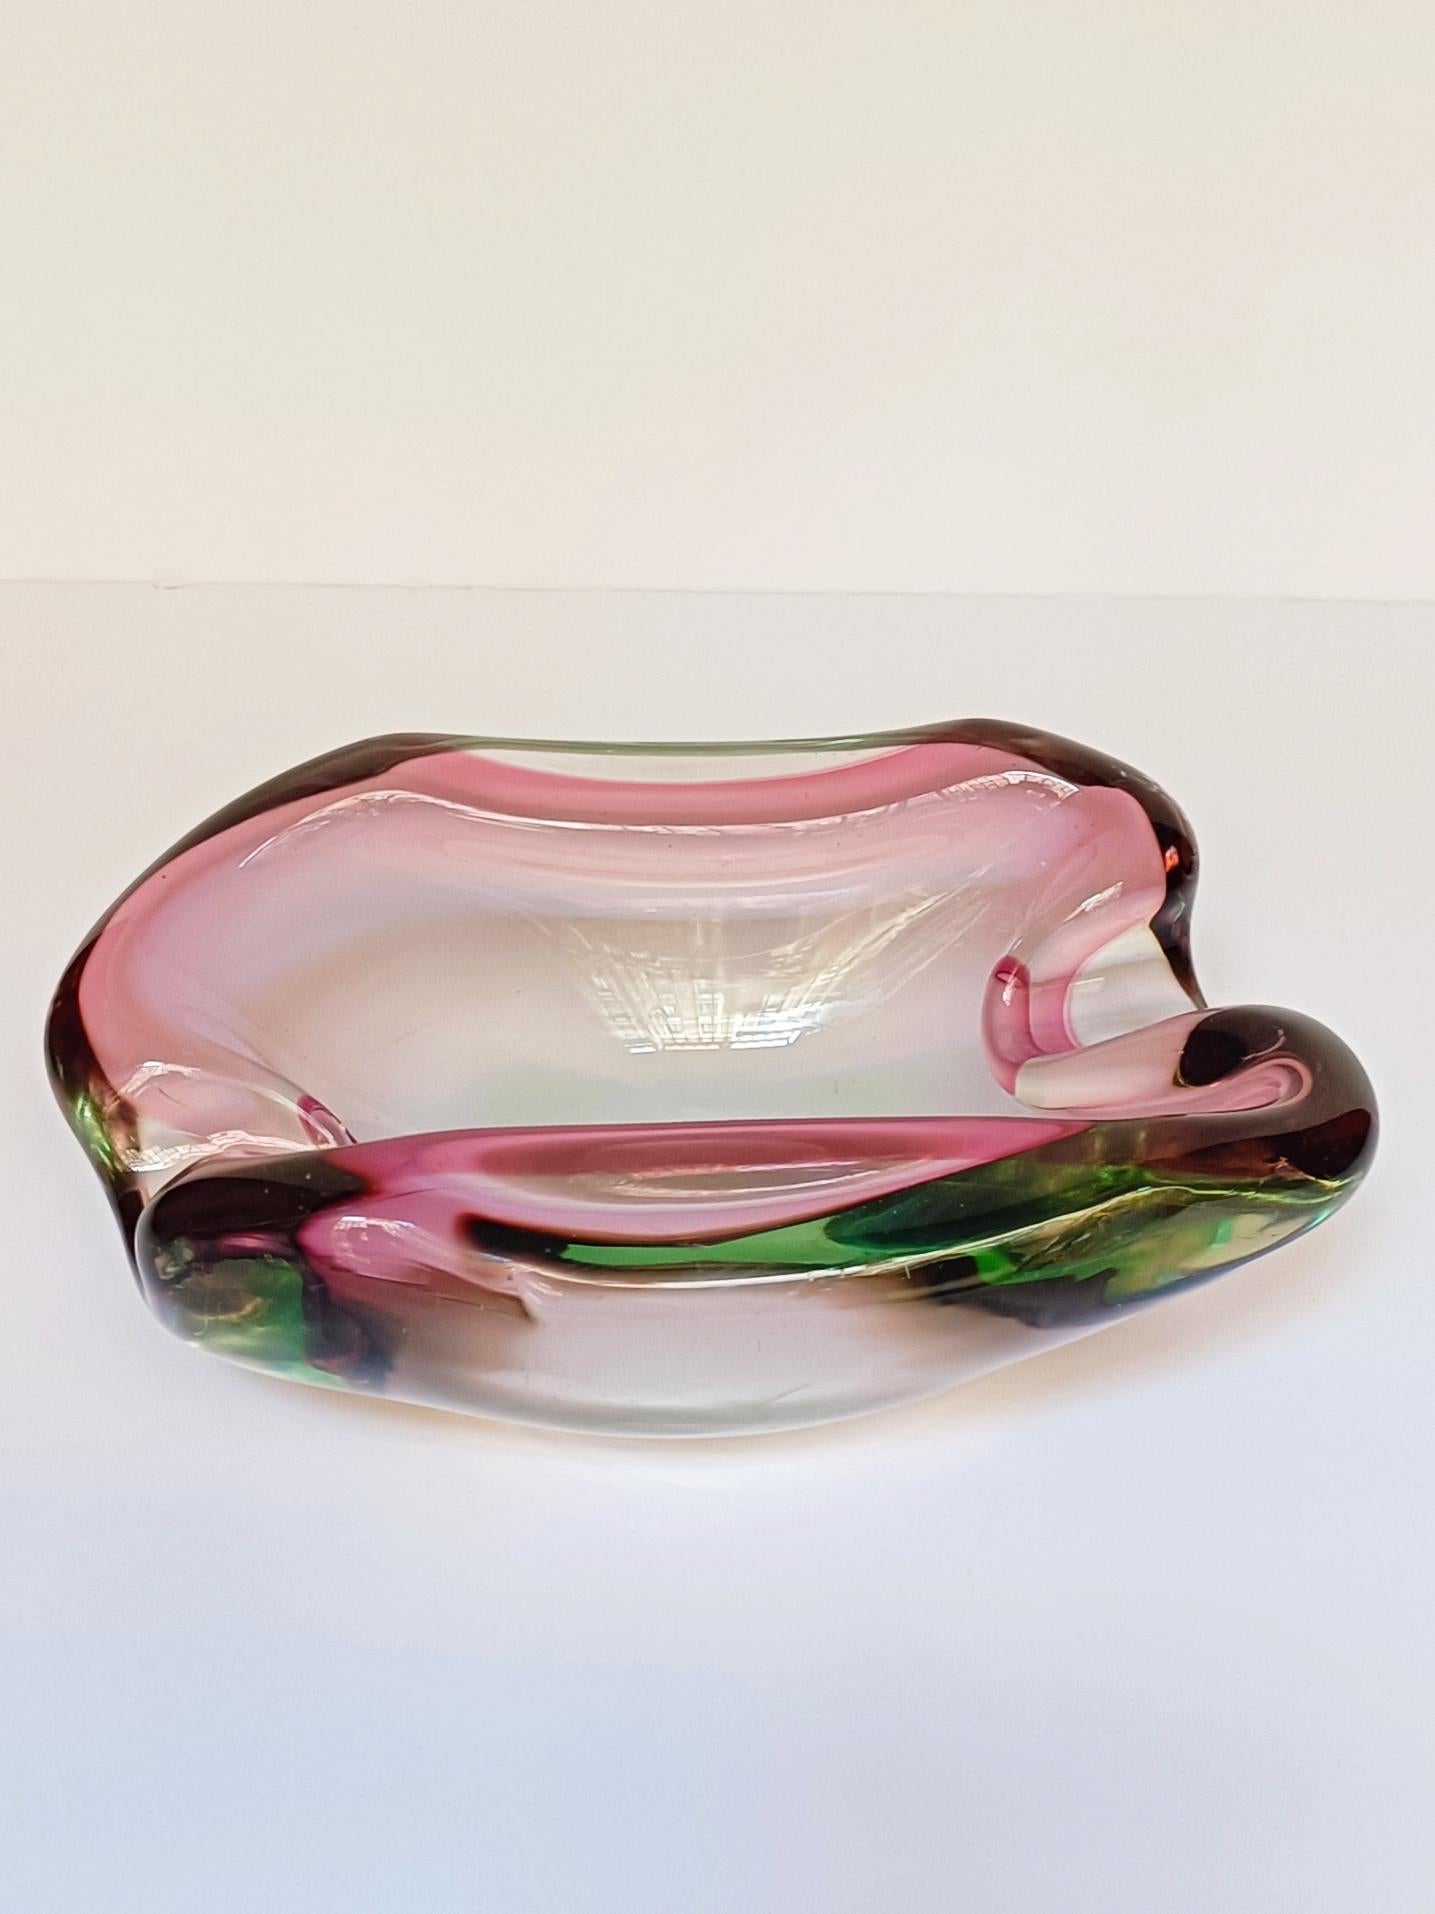 Exquisite Murano sommerso glass bowl by Venetian artist Flavio Poli. Created for Seguso Vetri d´Arte, this is a spectacular piece indeed, featuring an organicists design line and a beautiful very heavy and thick light colored glass that goes from